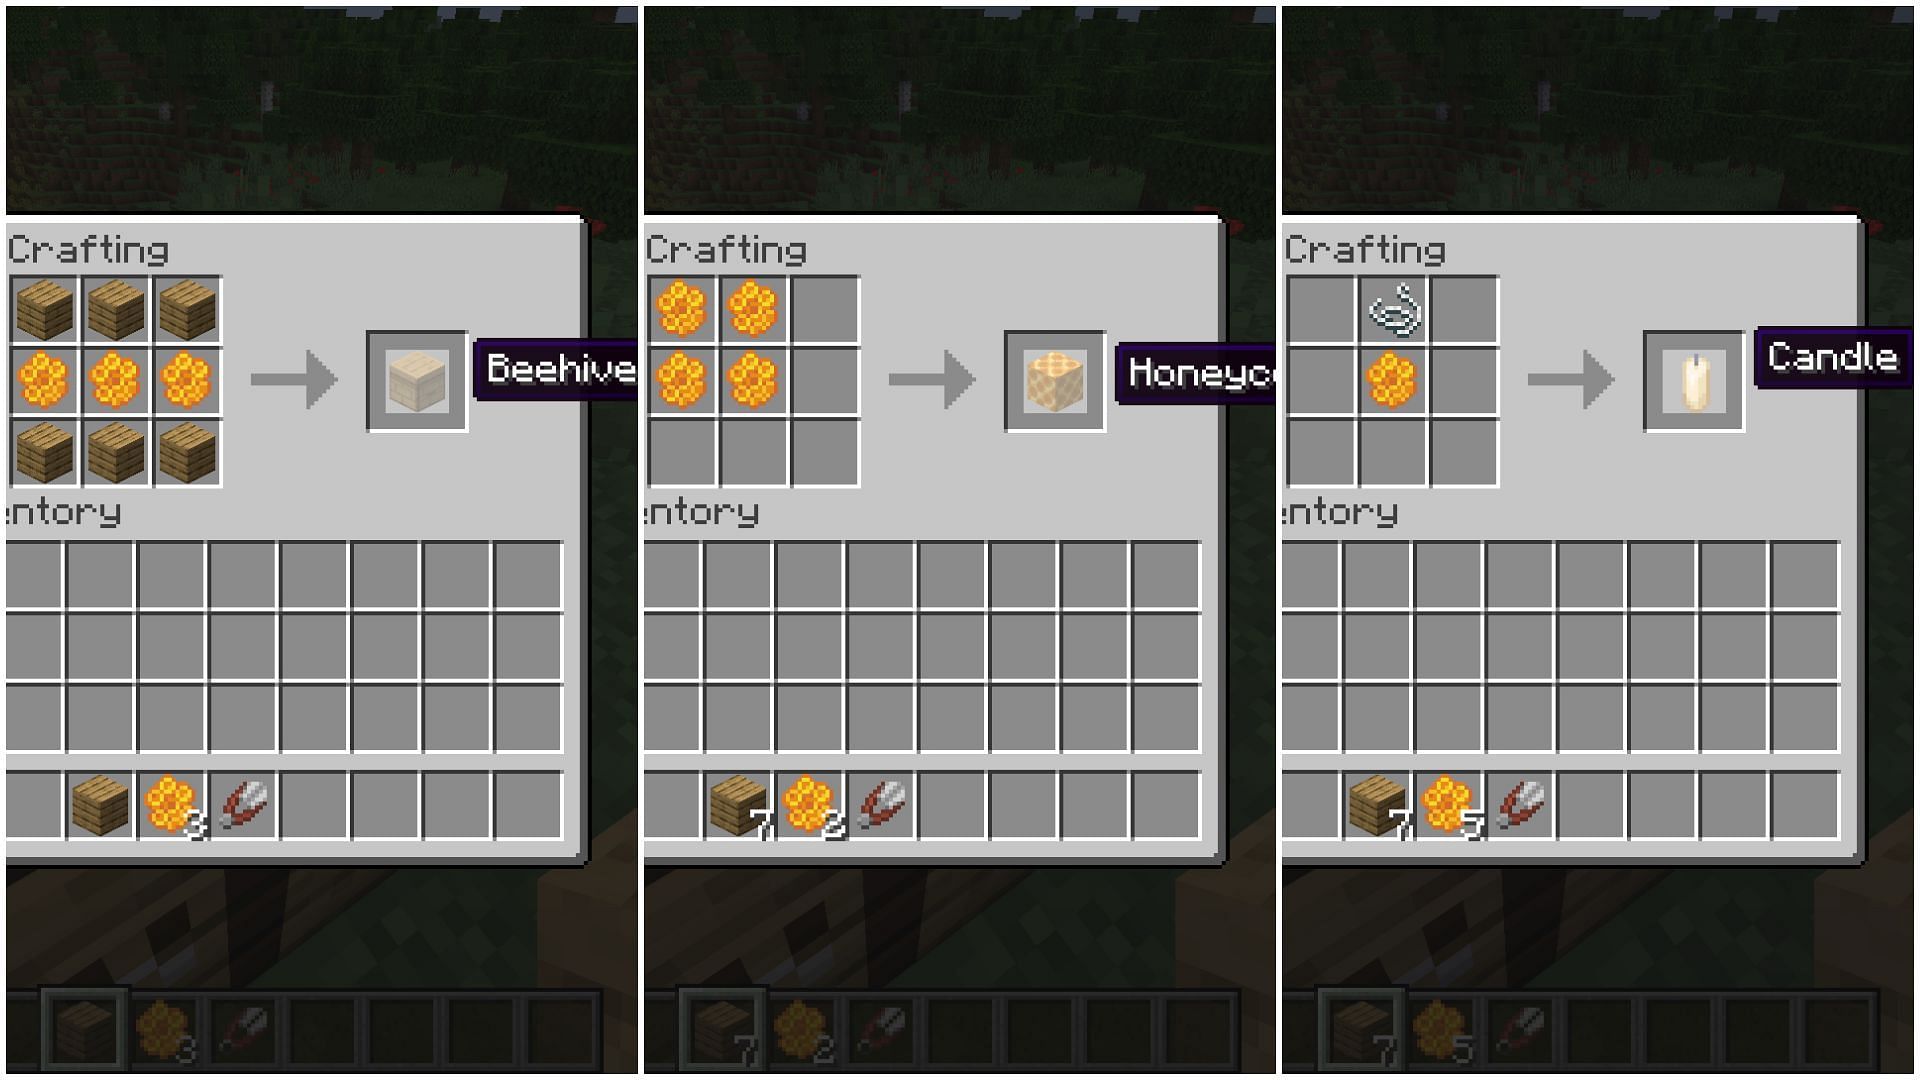 The honeycomb item can be used to craft loads of blocks in Minecraft (Image via Mojang)